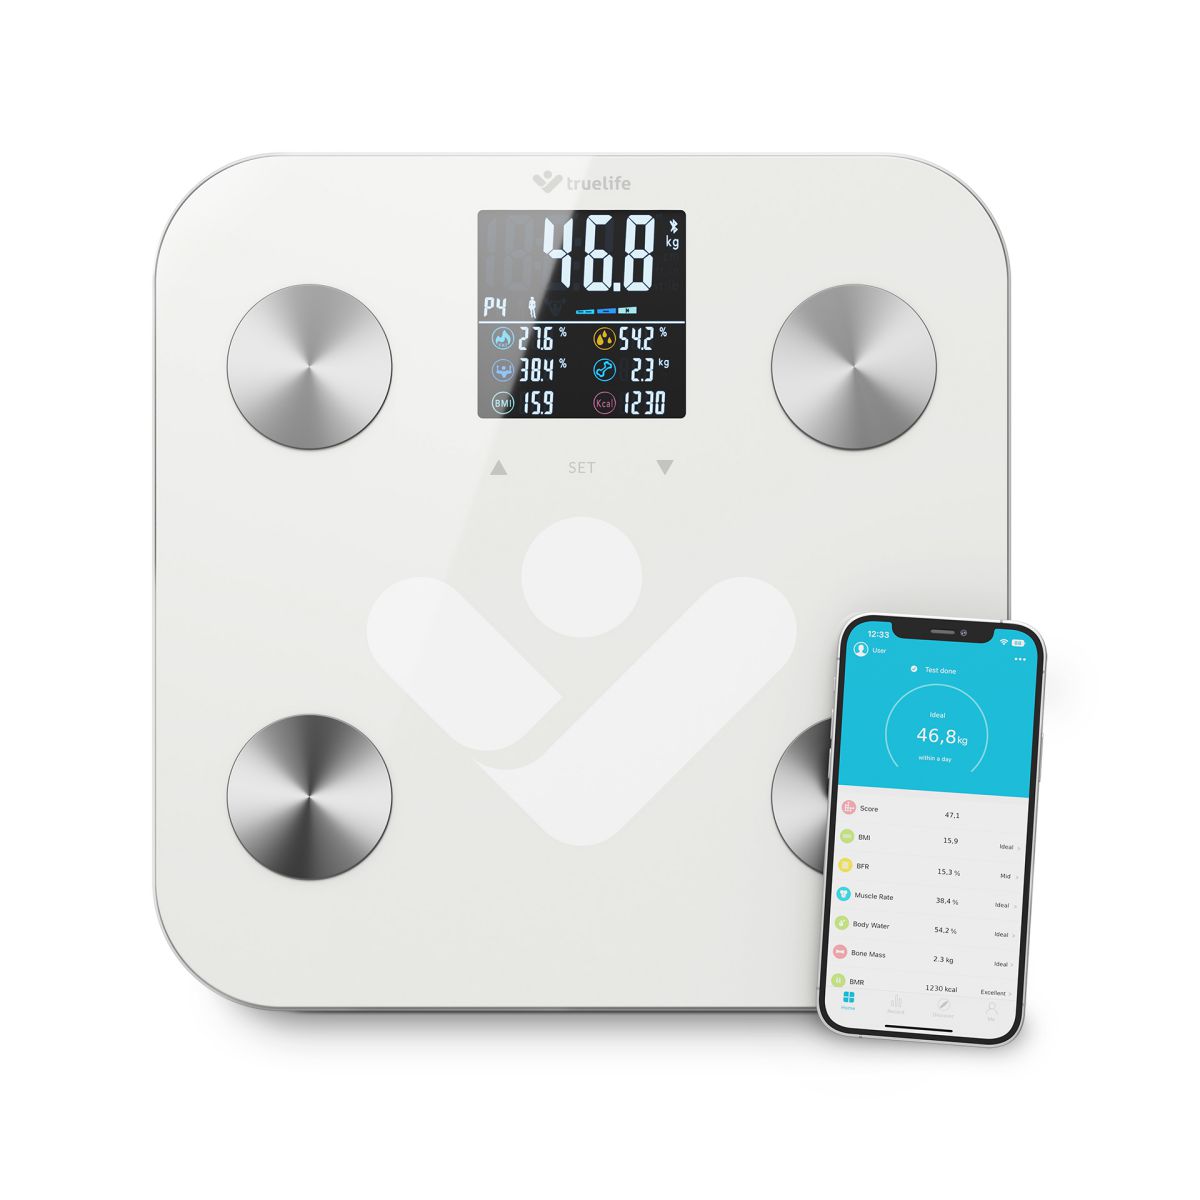 TrueLife FitScale W6 BT - Monitor your body in detail